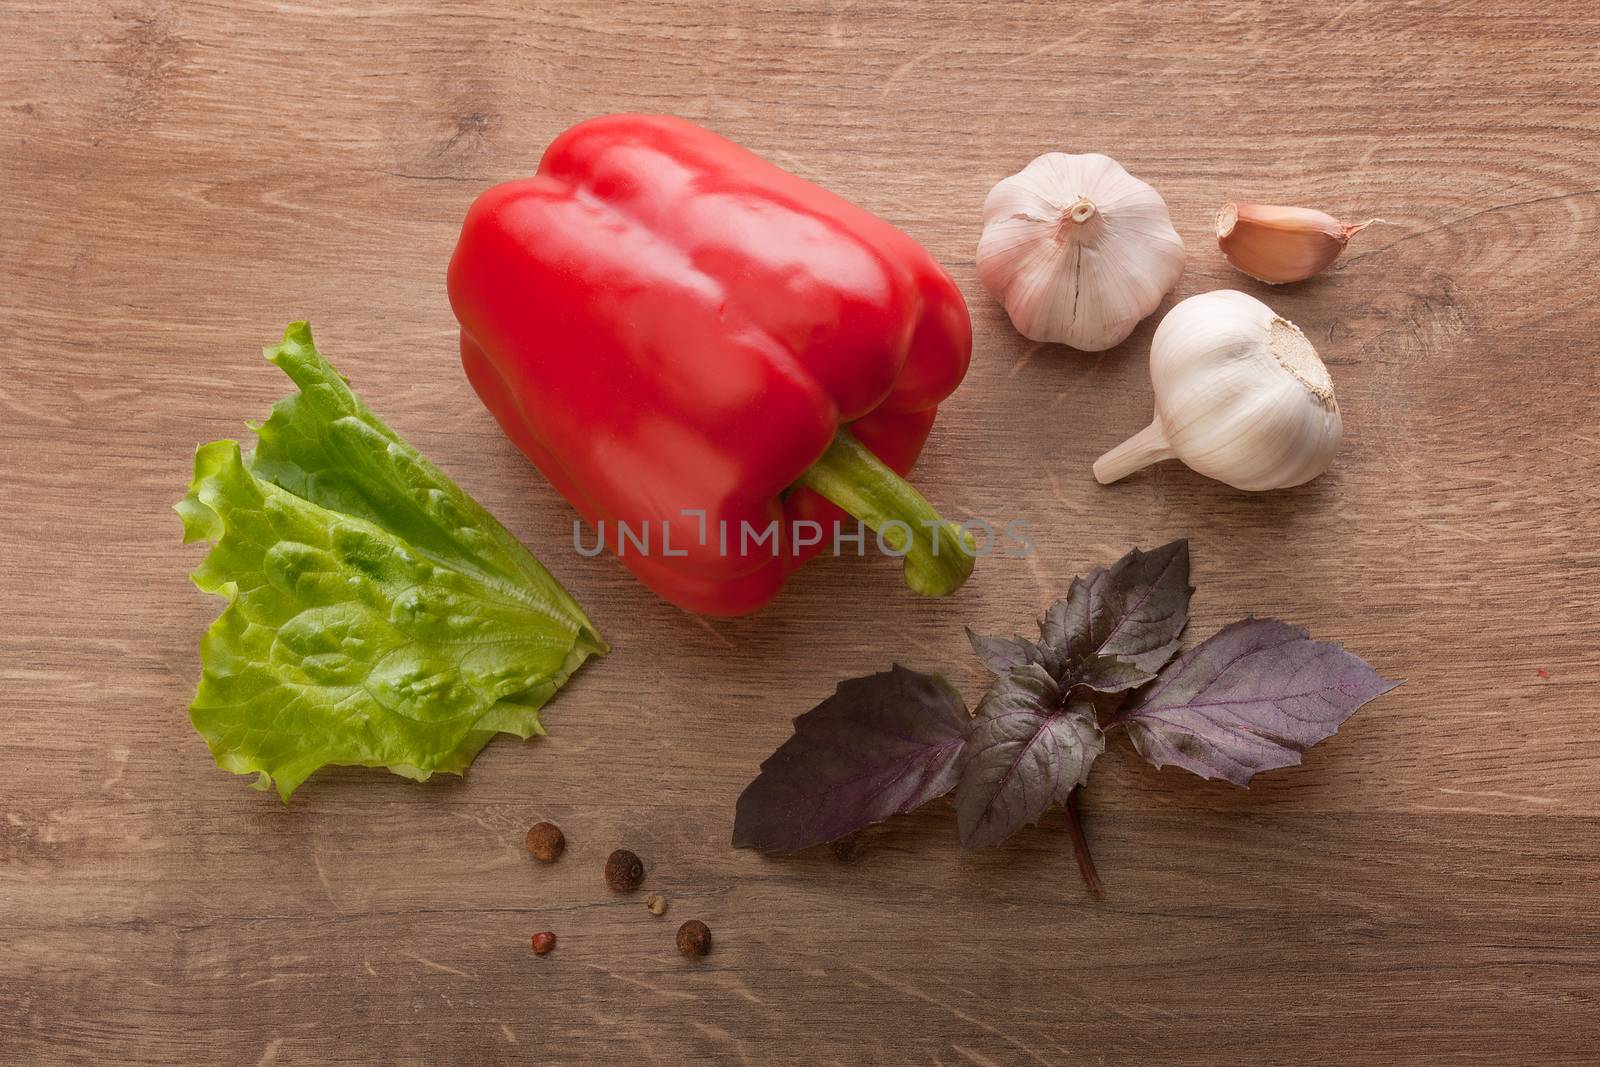 Red paprika, garlic, purple basil and lettuce on the wooden tabl by Angorius